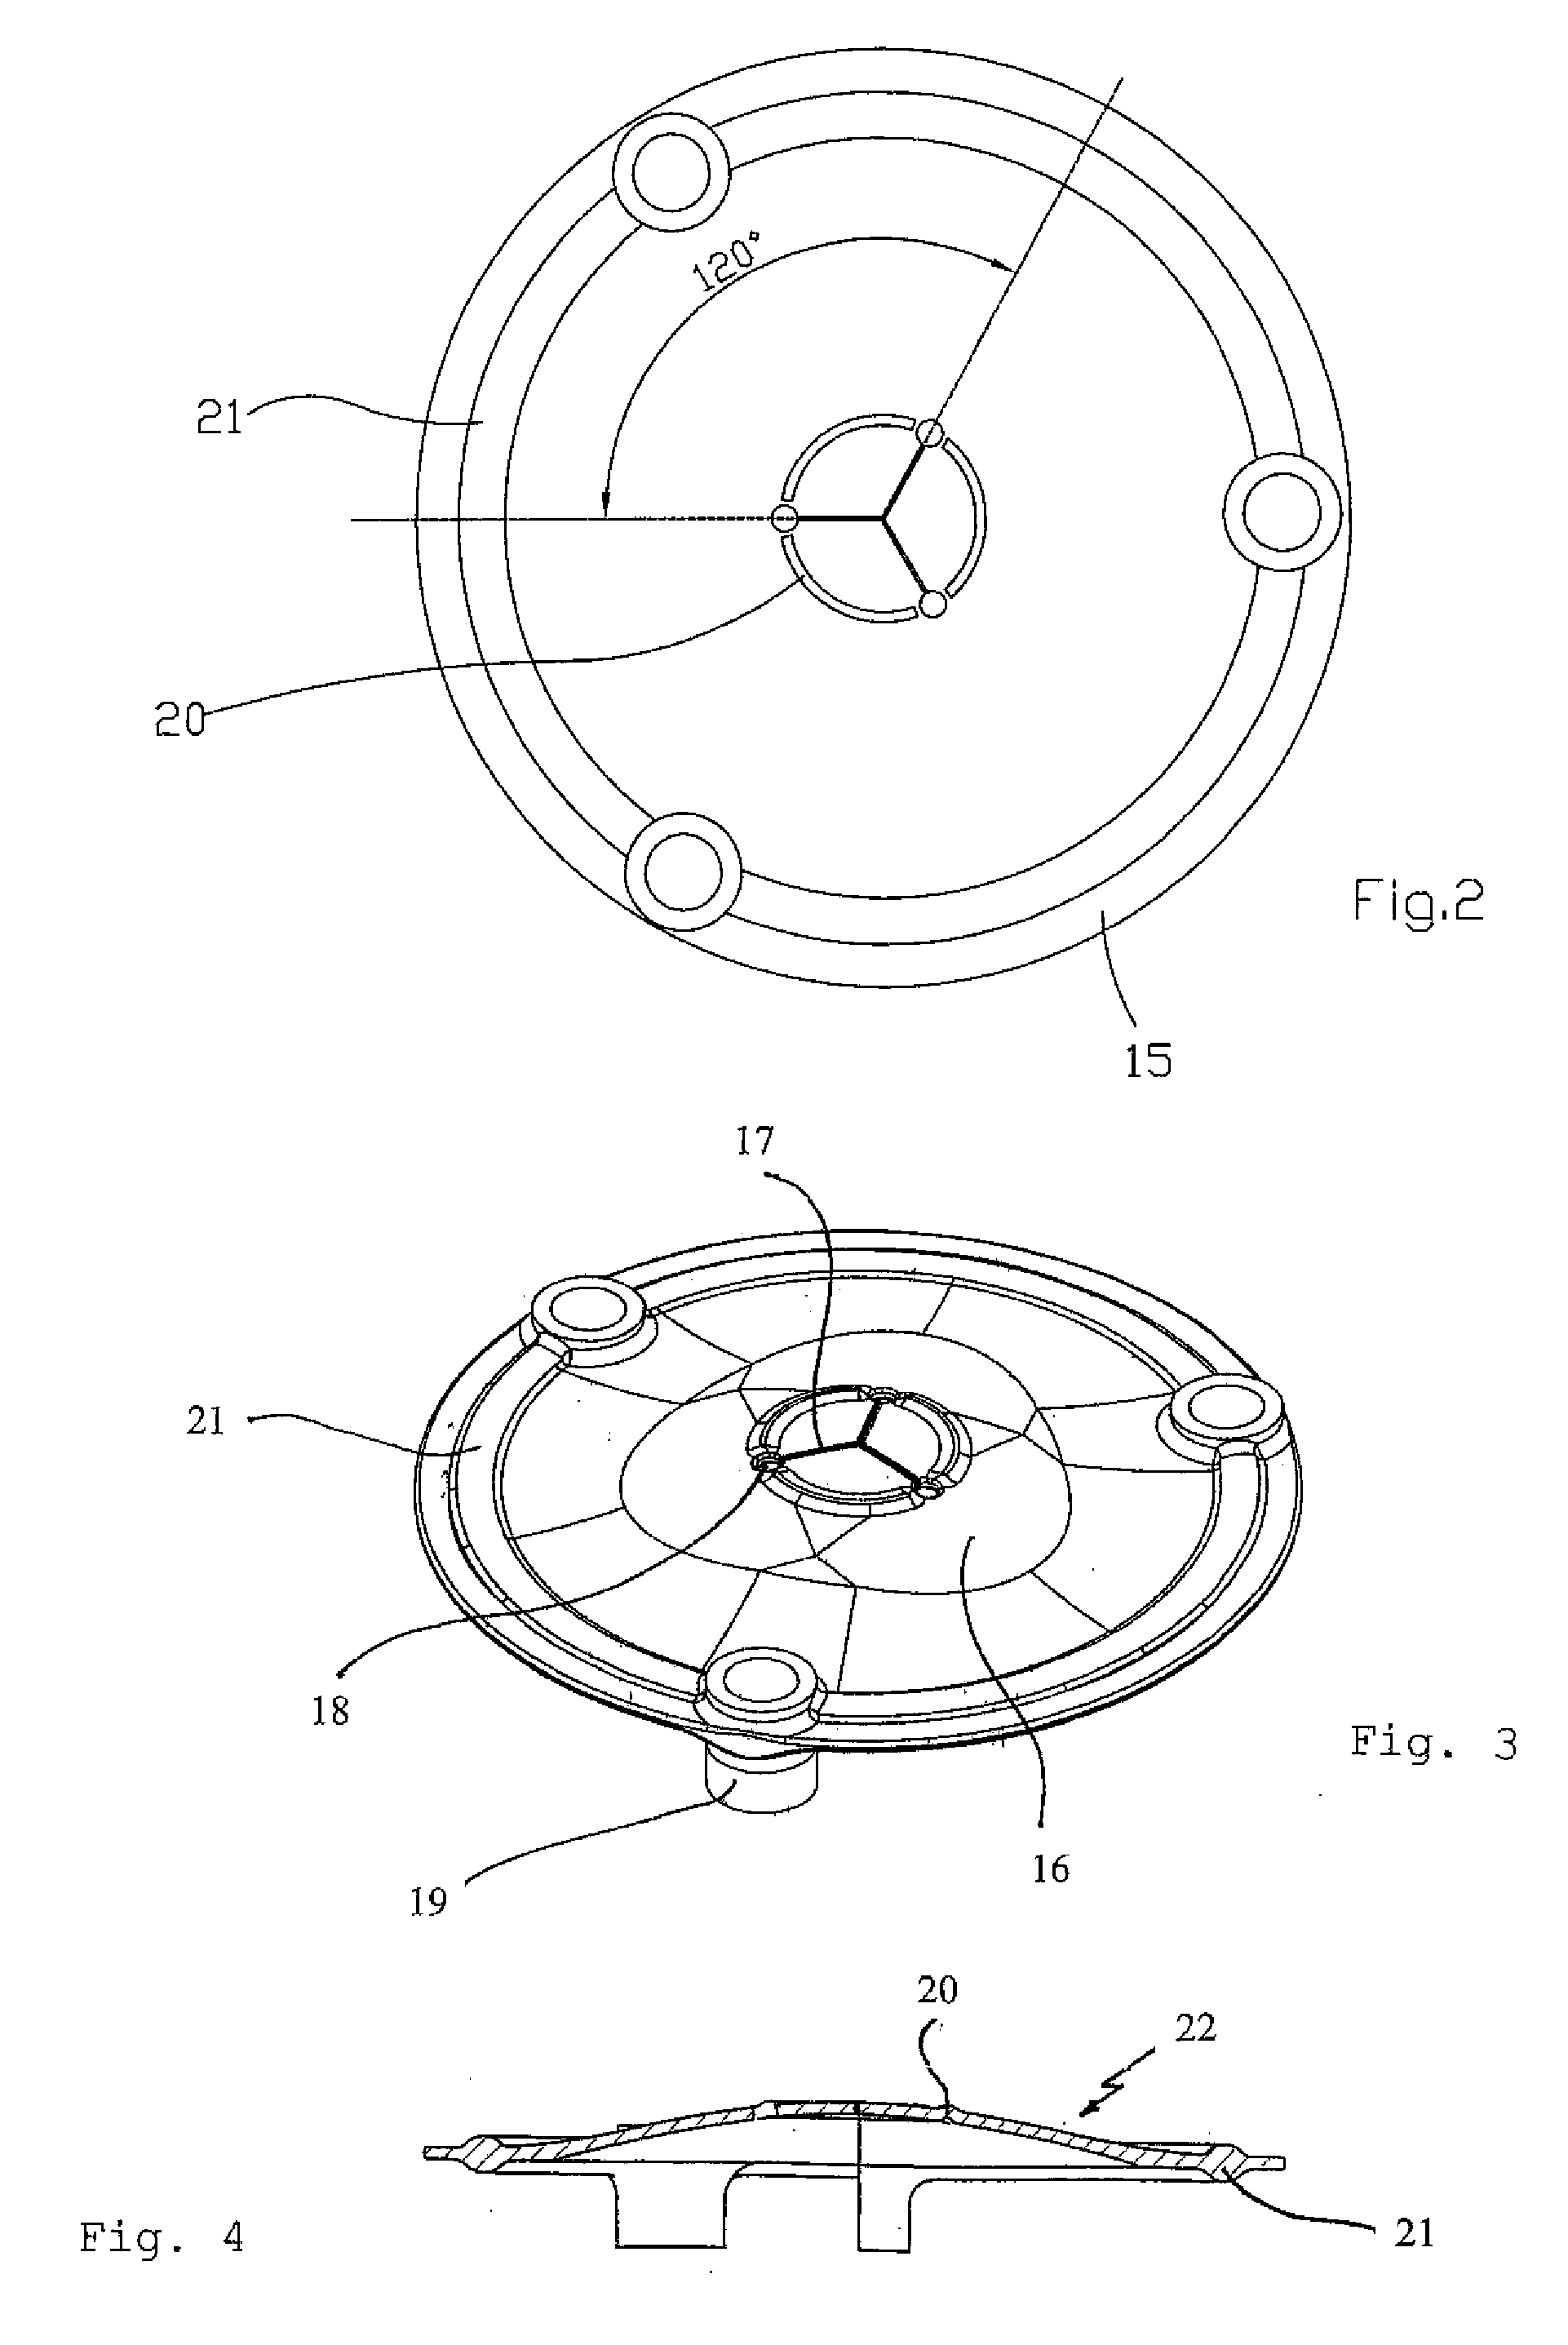 Method Of Producing Auto Induced Physiological Processes In A Body Cavity And A Device For Using It